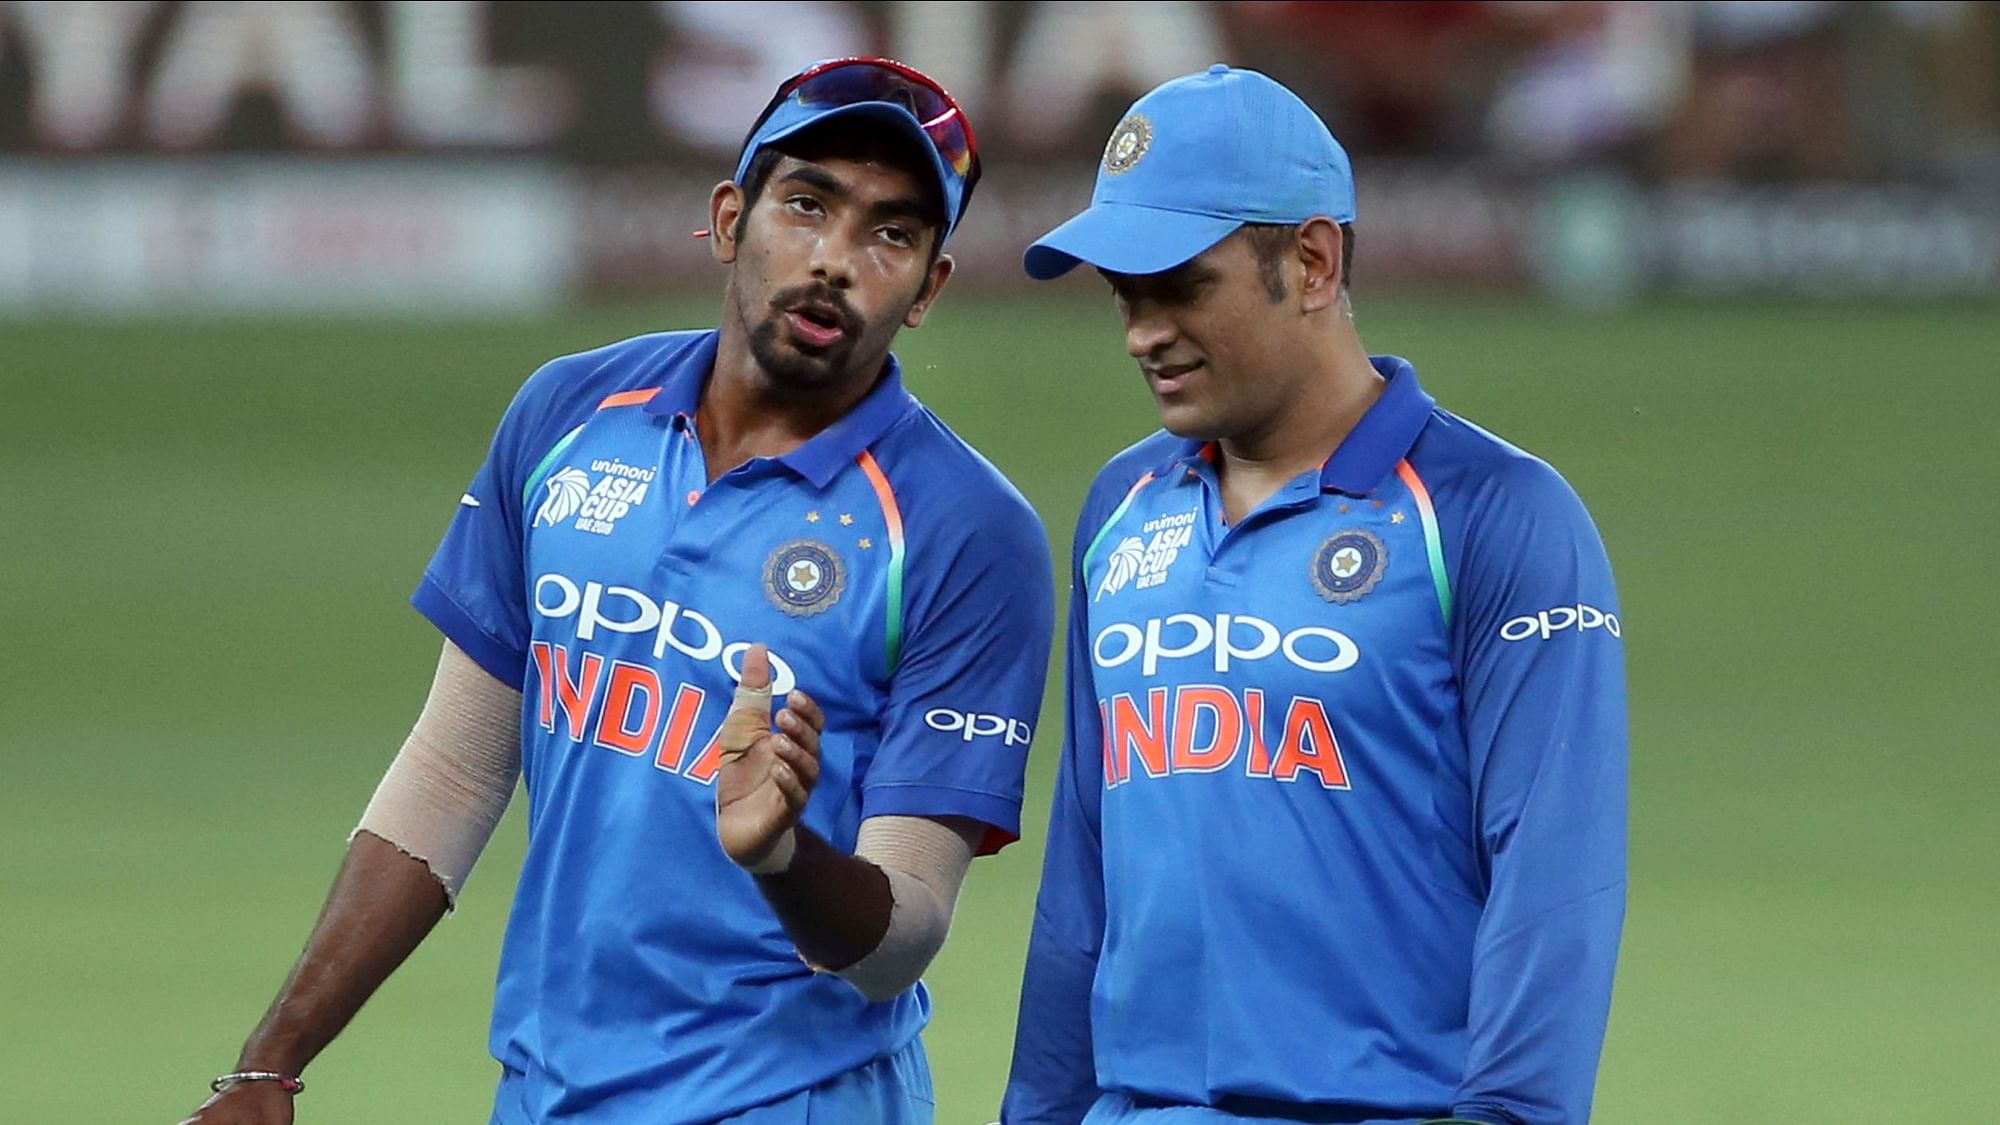 Jasprit Bumrah has spoken out in support of MS Dhoni and his innings against West Indies.